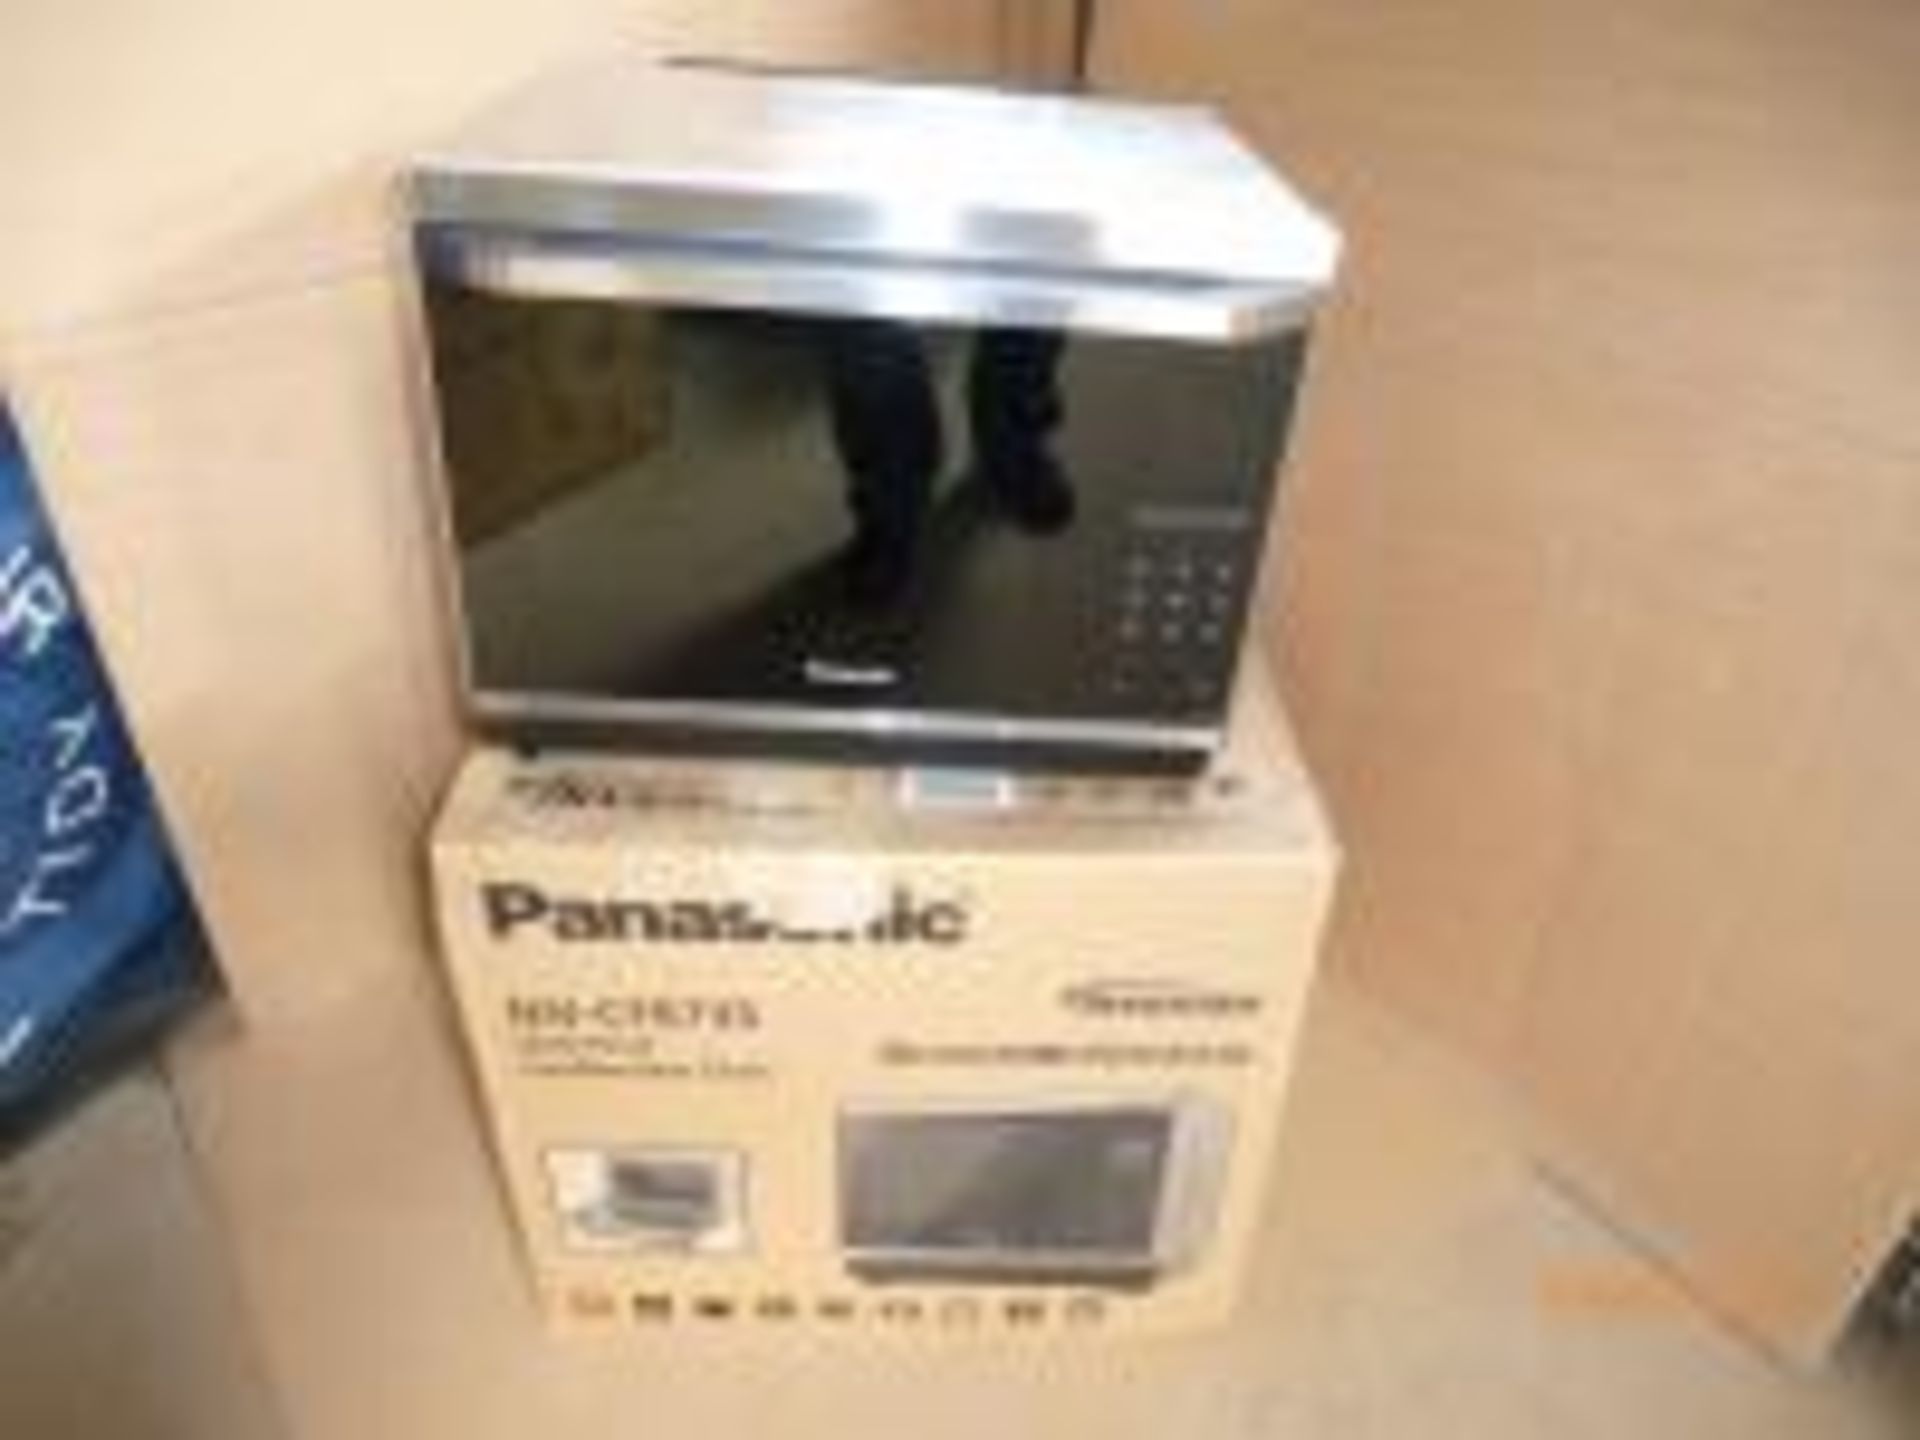 Panasonic NNCF873SBPQ Combination Stainless Steel Microwave Oven, 32L, 1000 Watt - FREE DELIVERY - Image 3 of 5